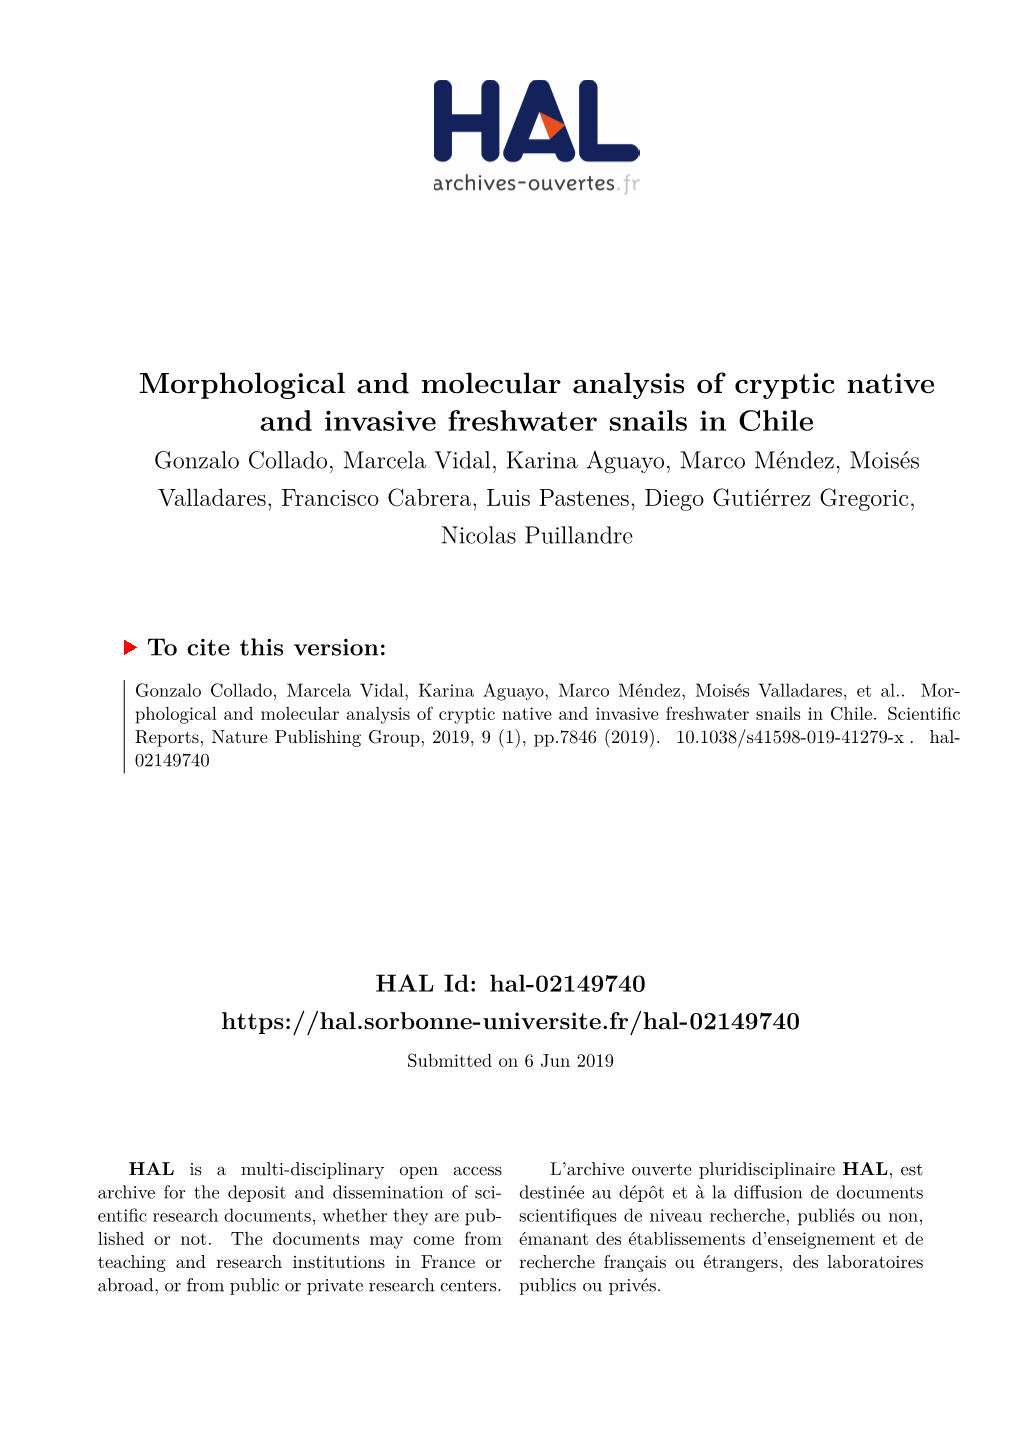 Morphological and Molecular Analysis of Cryptic Native and Invasive Freshwater Snails in Chile